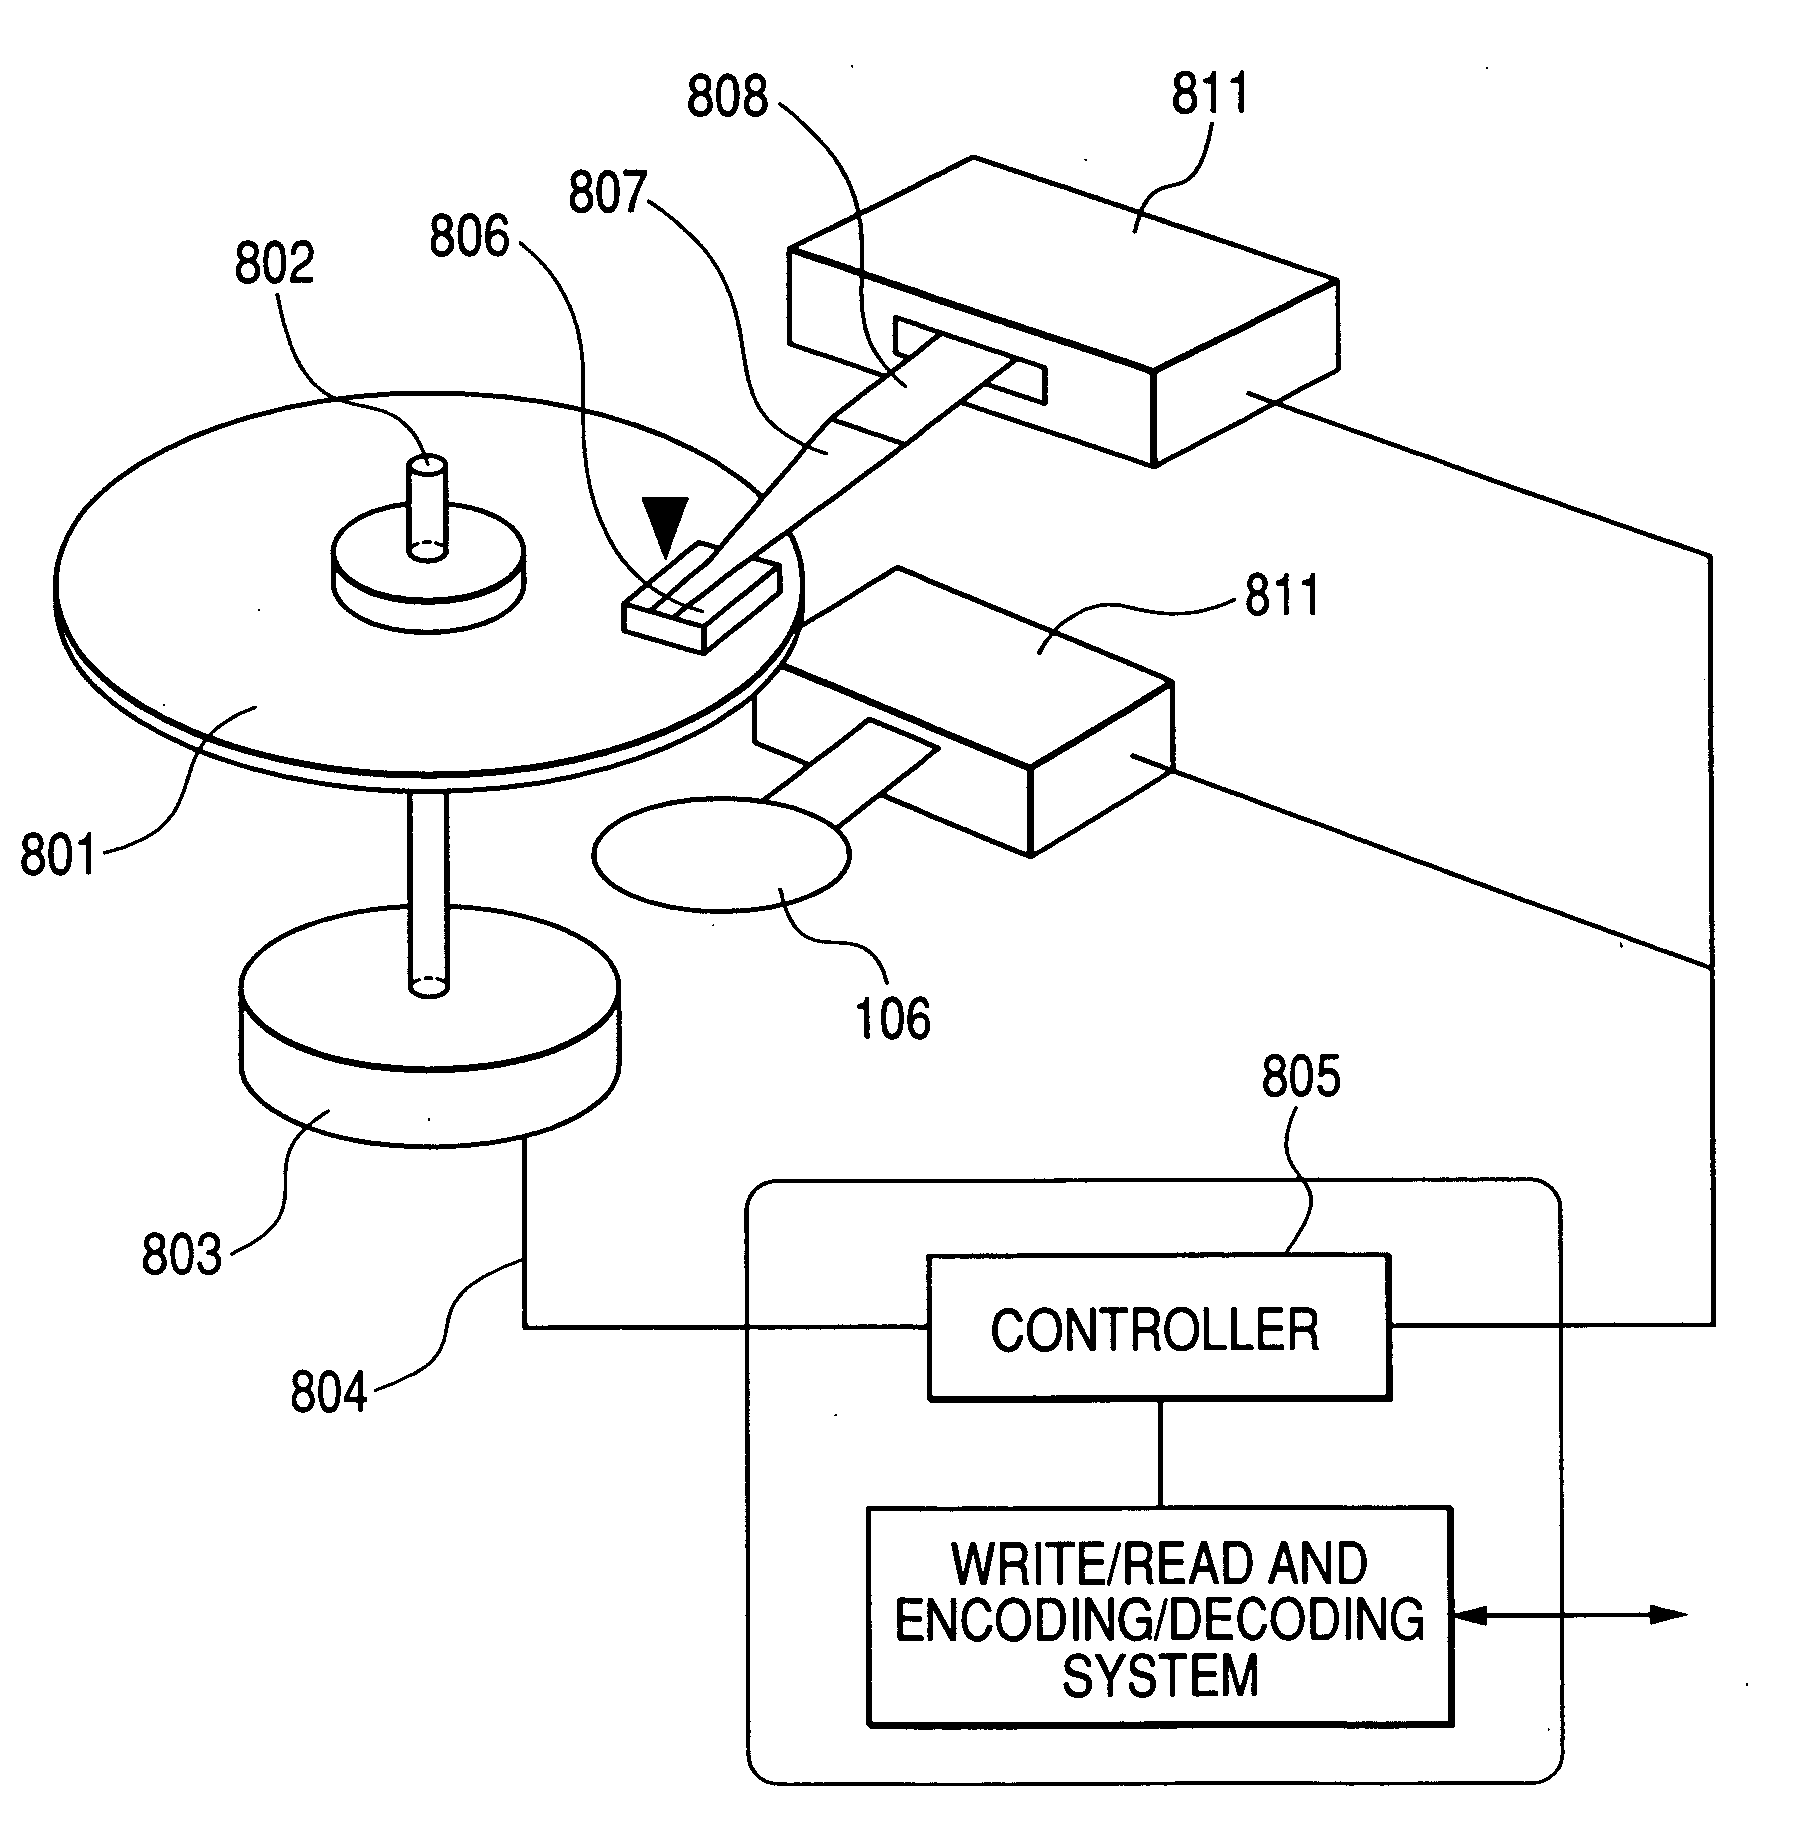 Magnetic recording device